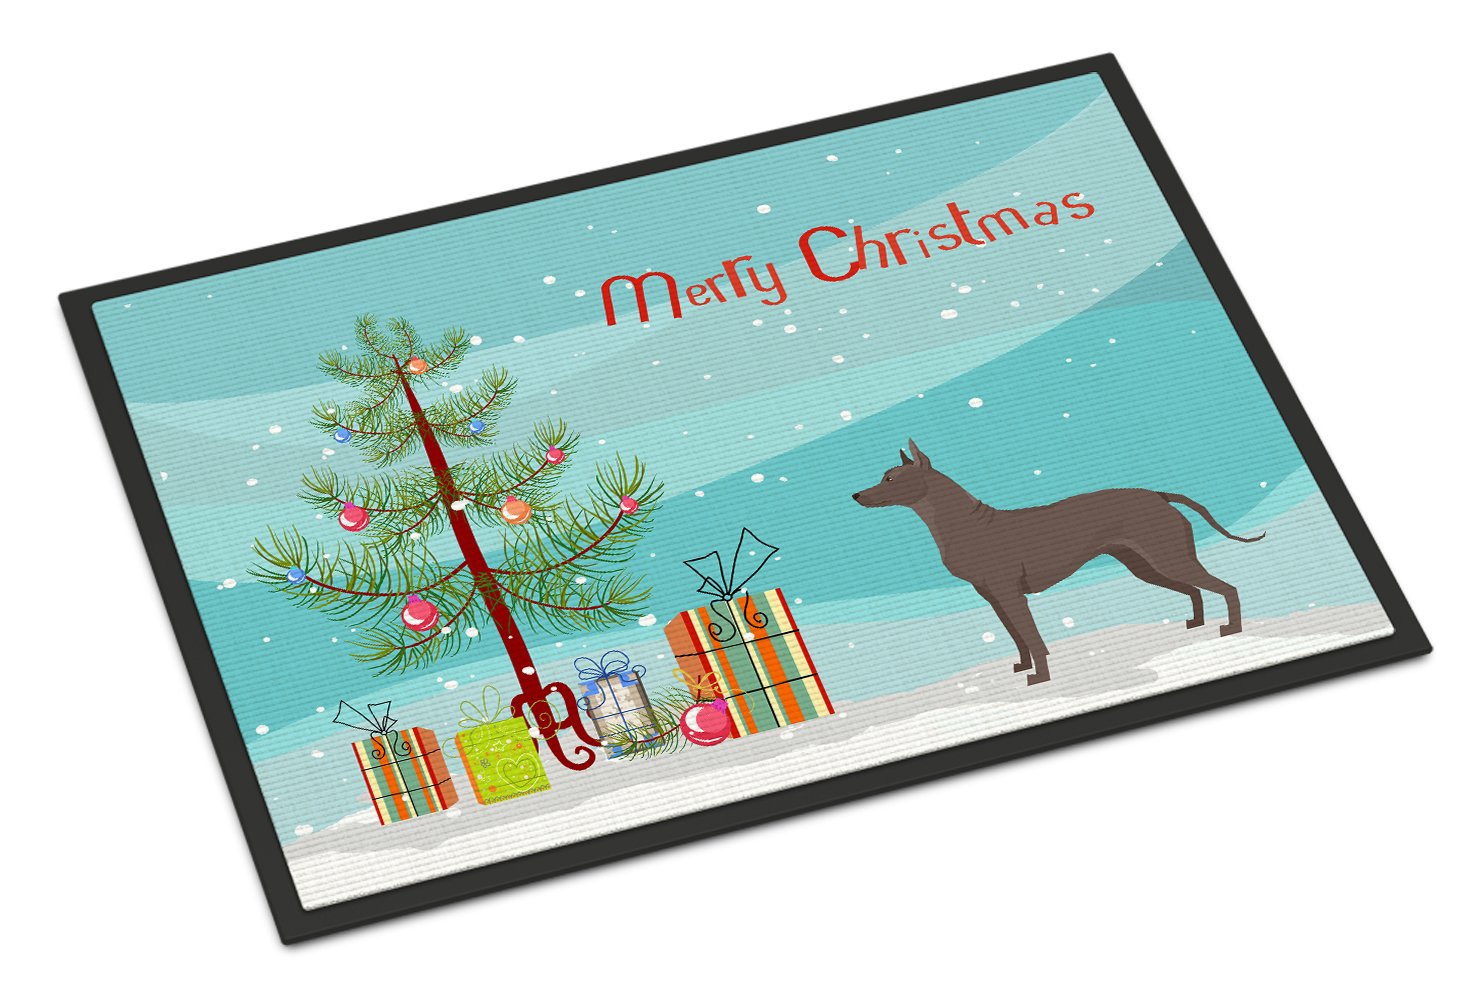 Mexican Hairless Dog Xolo Christmas Tree Indoor or Outdoor Mat 24x36 CK3570JMAT by Caroline's Treasures